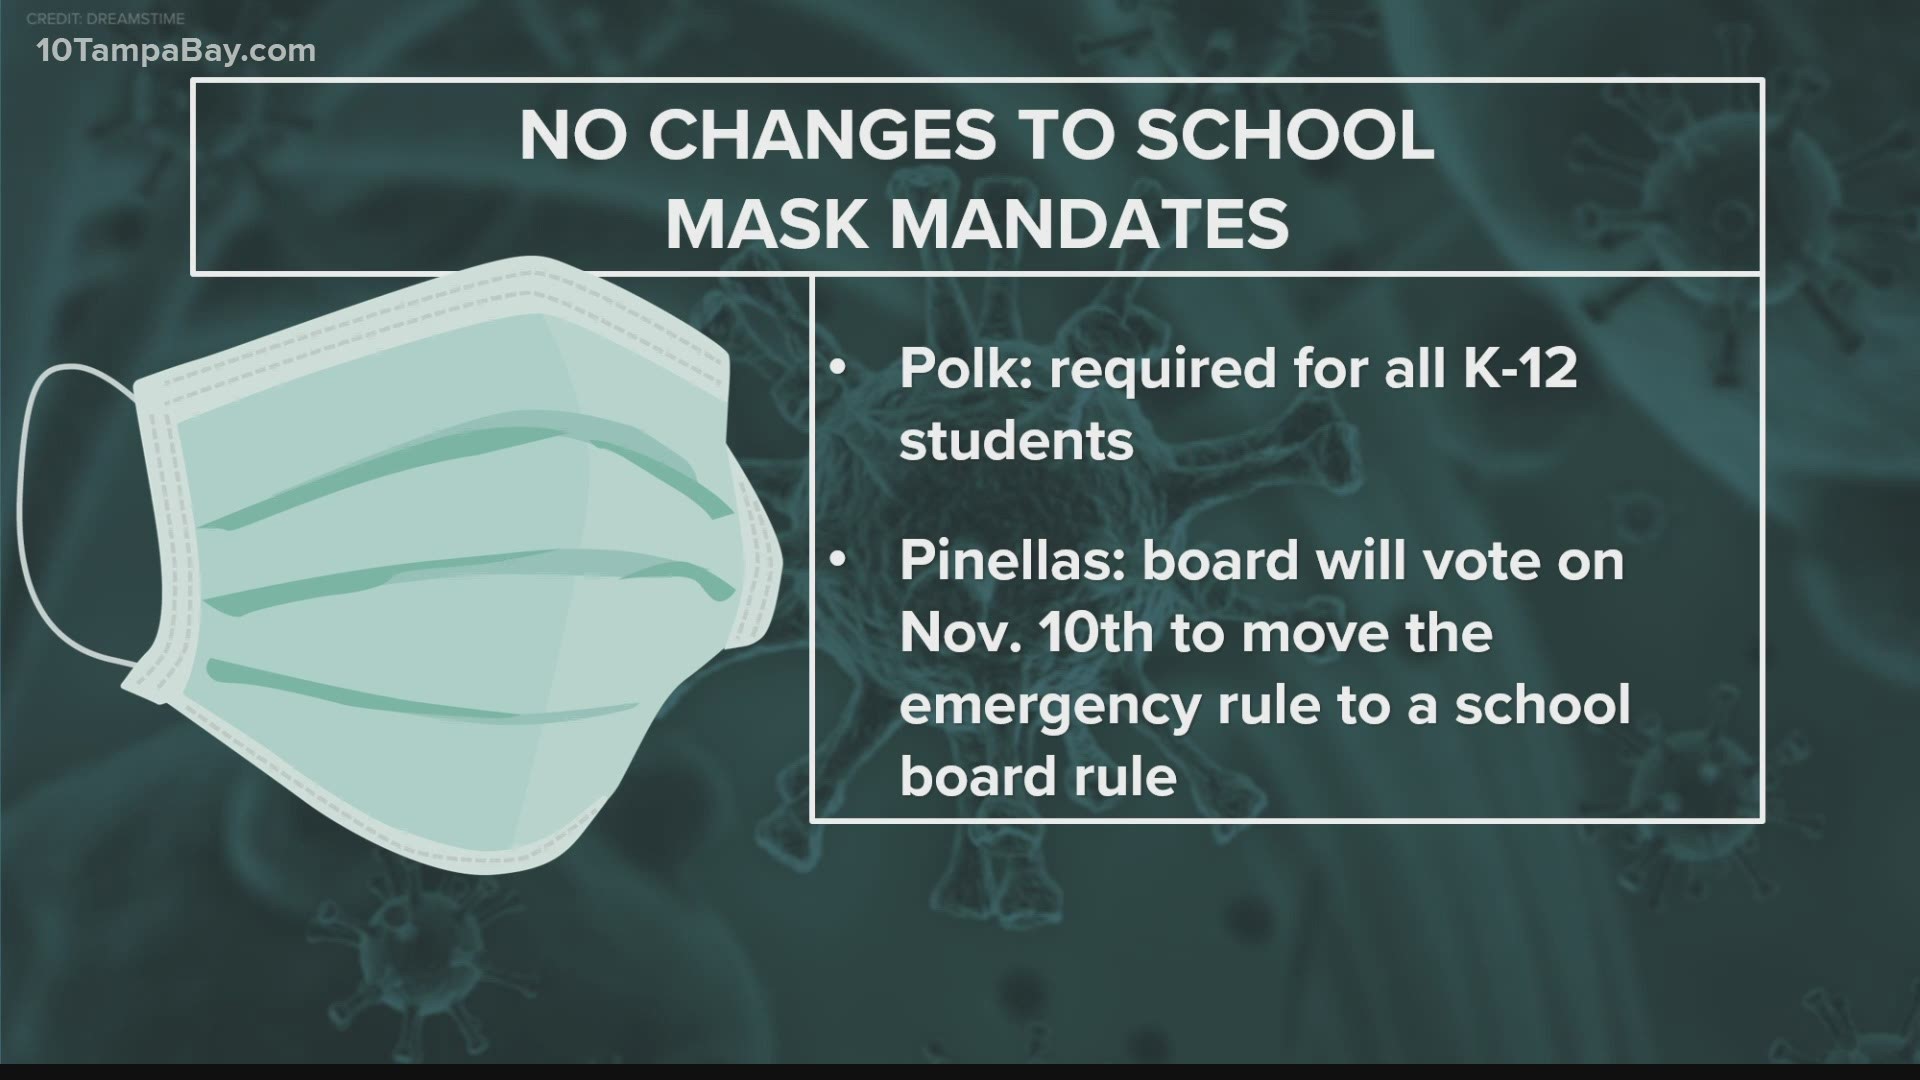 Parents may be curious about their student's school district's mask policy, especially as cities make changes to their mask ordinances.